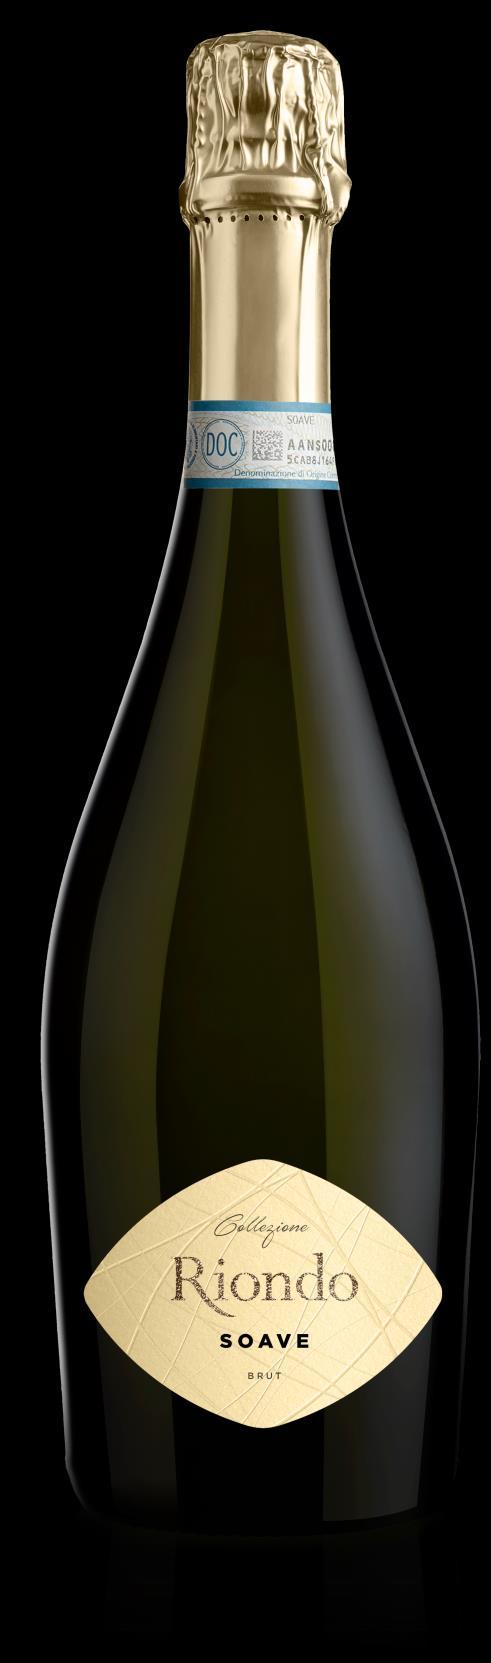 Collezione Soave Spumante White sparkling wine, Brut Soave D.O.C. Garganega 11,5% 12 g/liter 6 g/liter 6-8 C Cold maceration of the grapes, natural fermentation at a controlled temperature of 16 C.